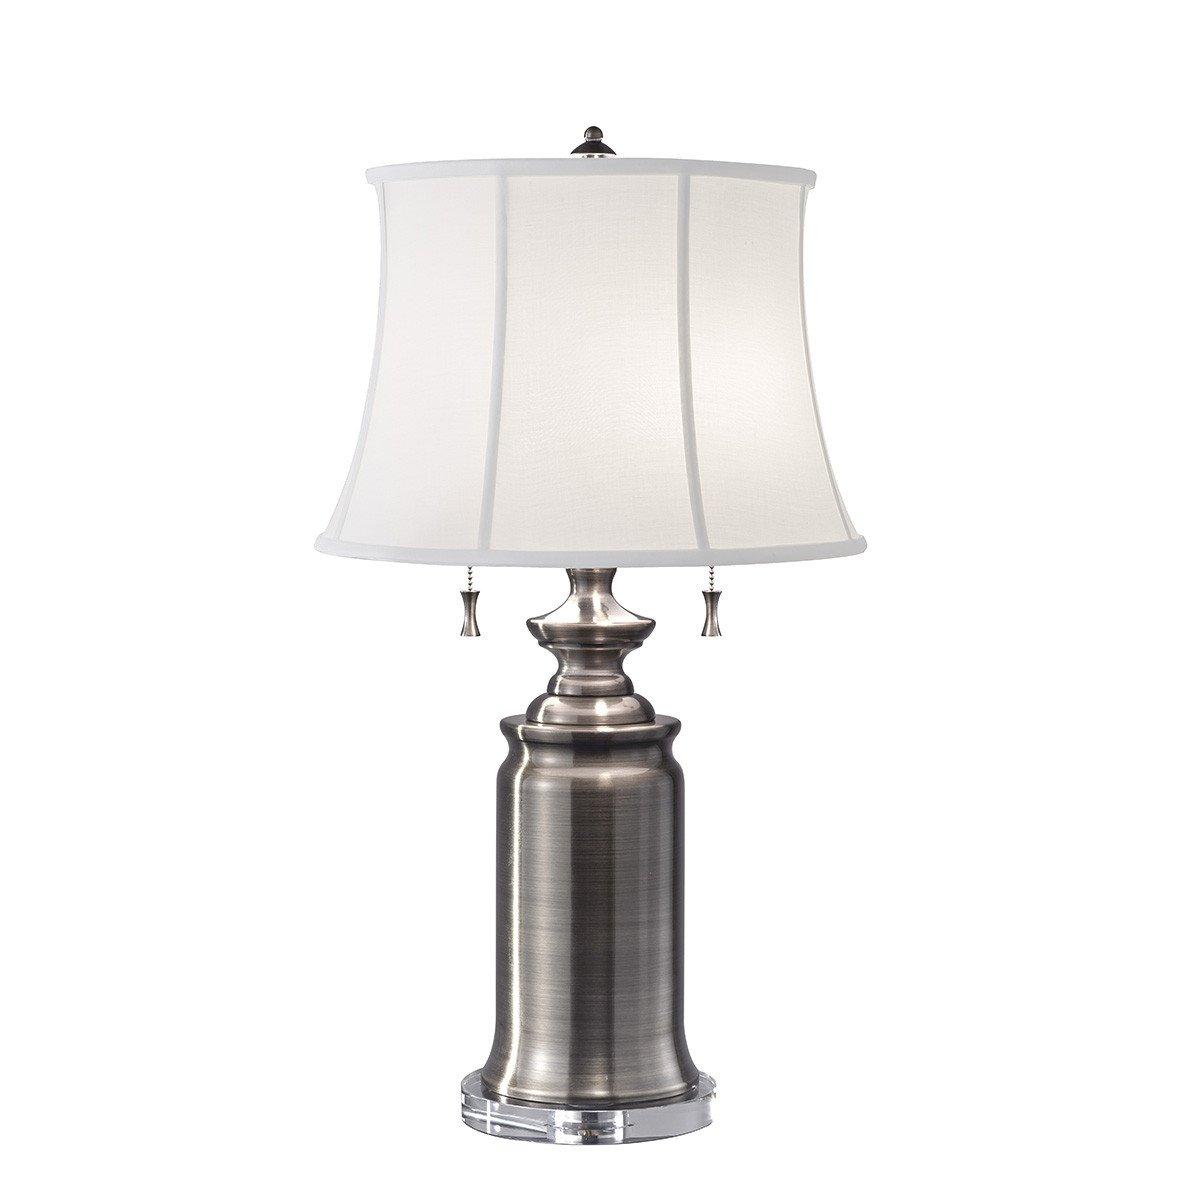 Stateroom 2 Light Table Lamp Antique Nickel E27